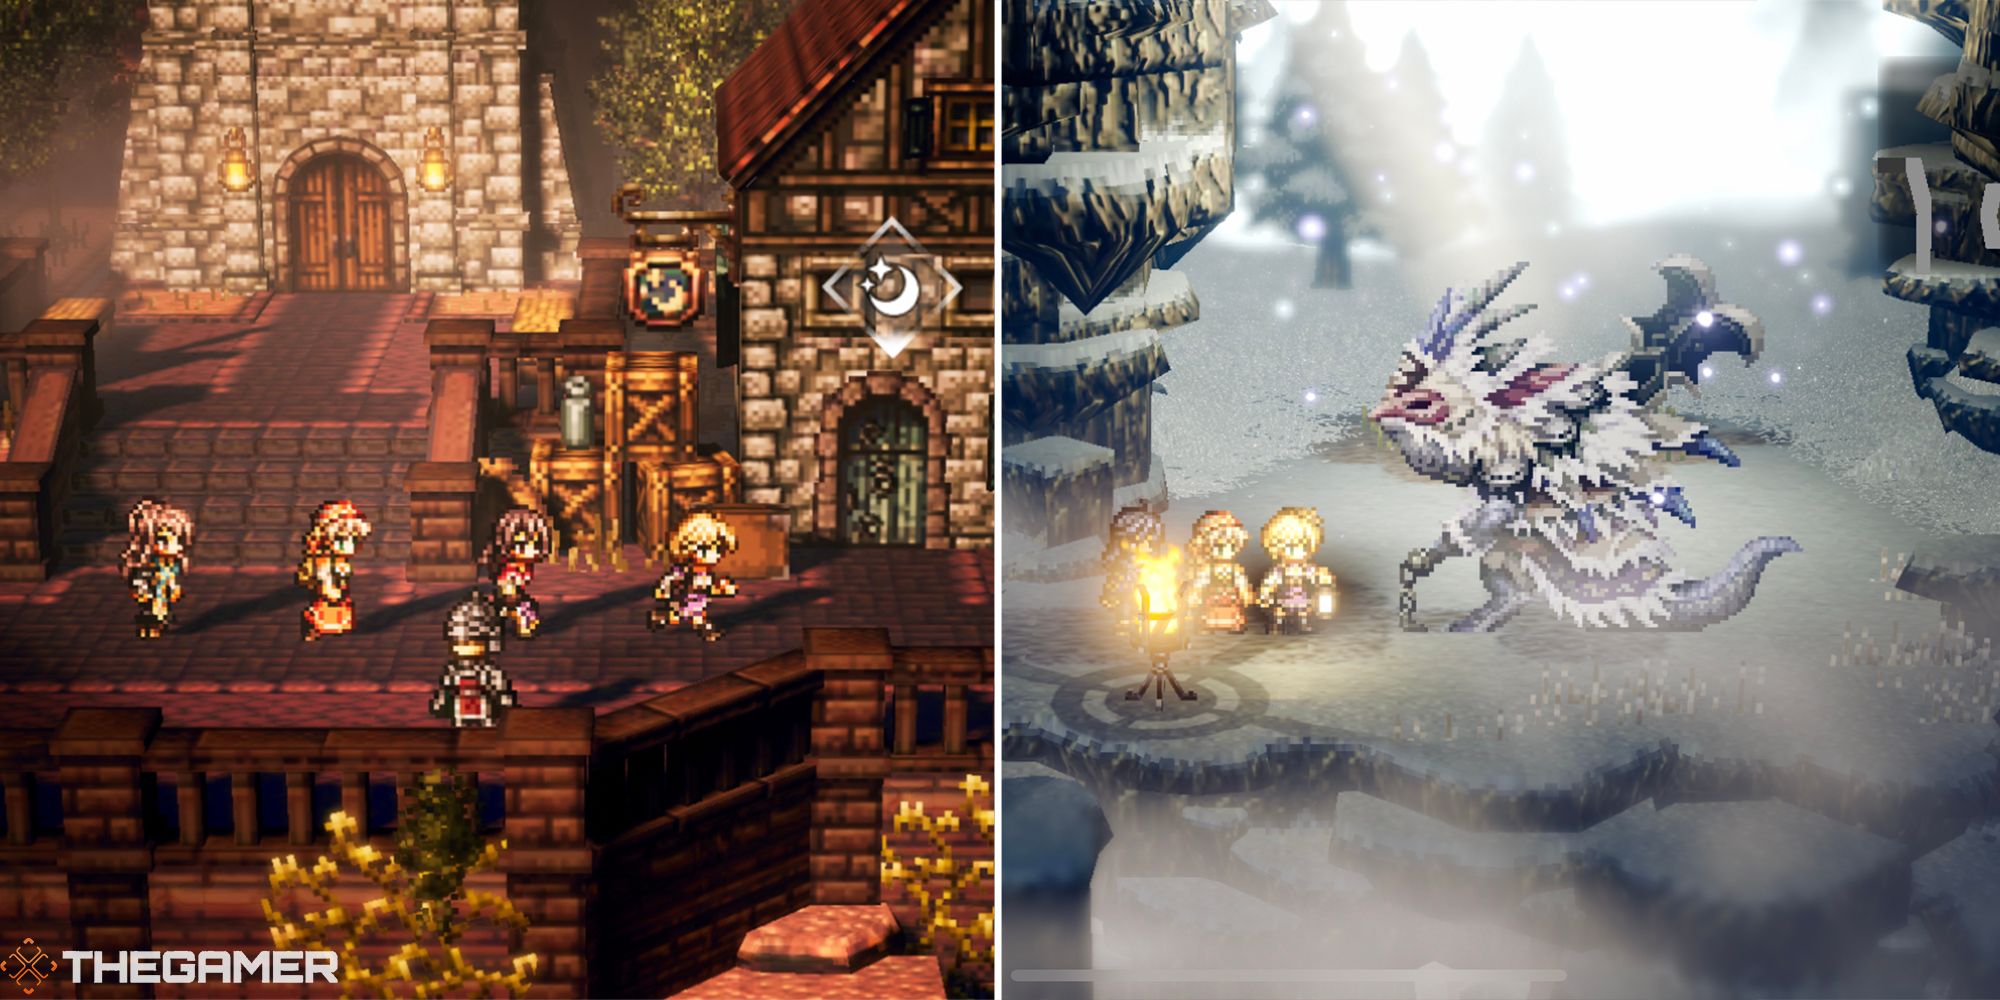 Octopath Traveler: Champions of the Continent - How to pre